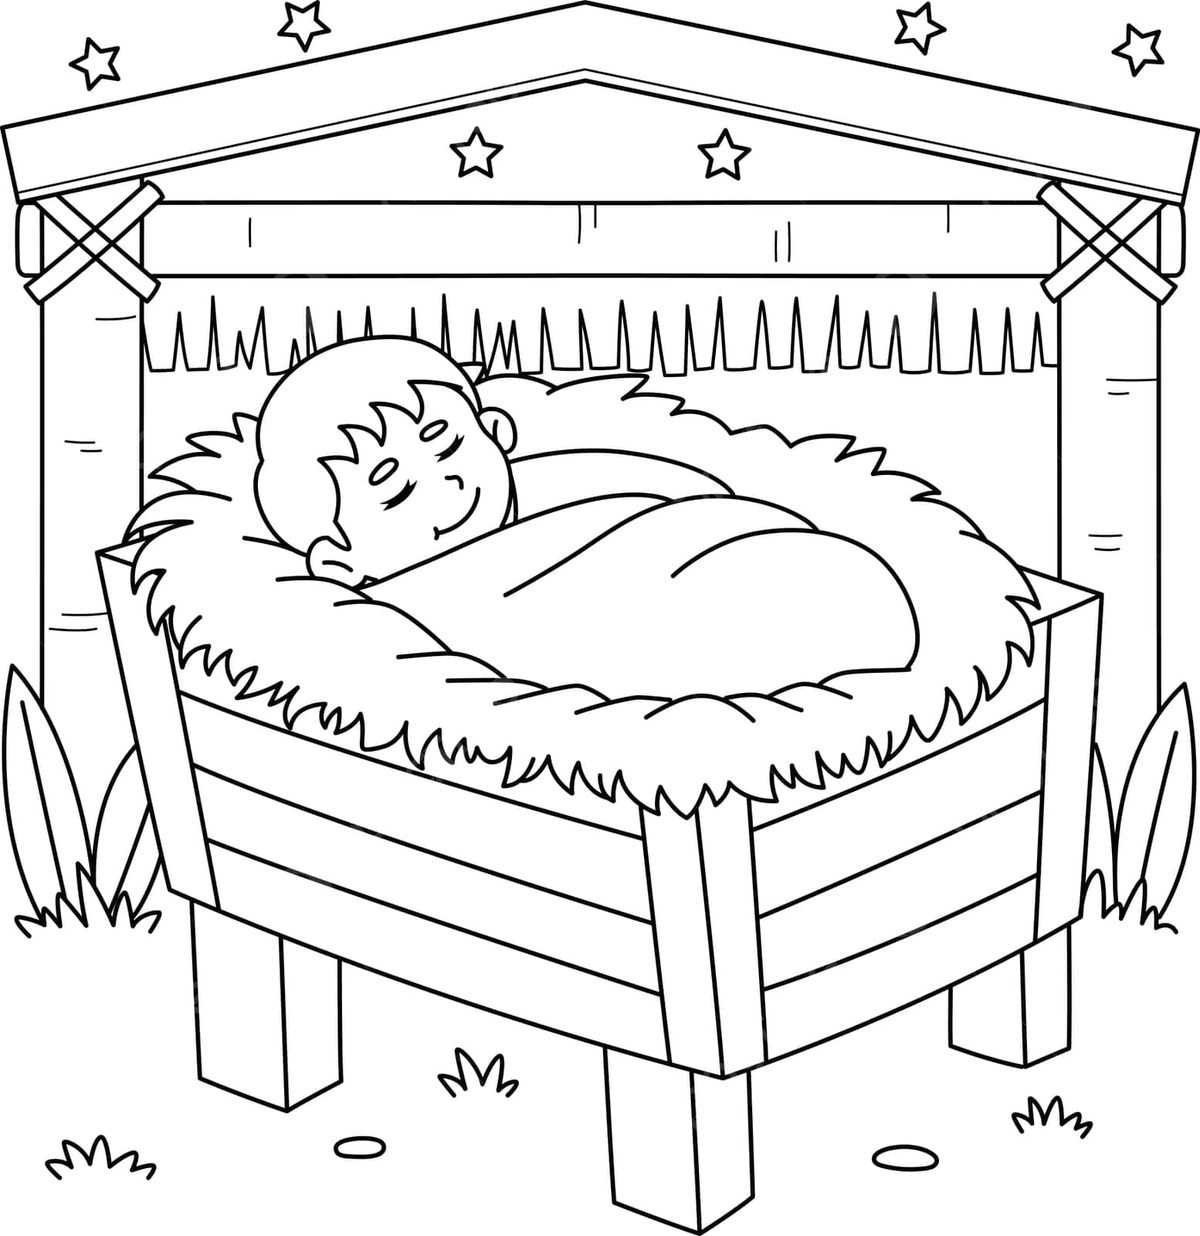 Christian baby jesus coloring page for kids vector jesus design vector baby drawing jesus drawing ring drawing png and vector with transparent background for free download